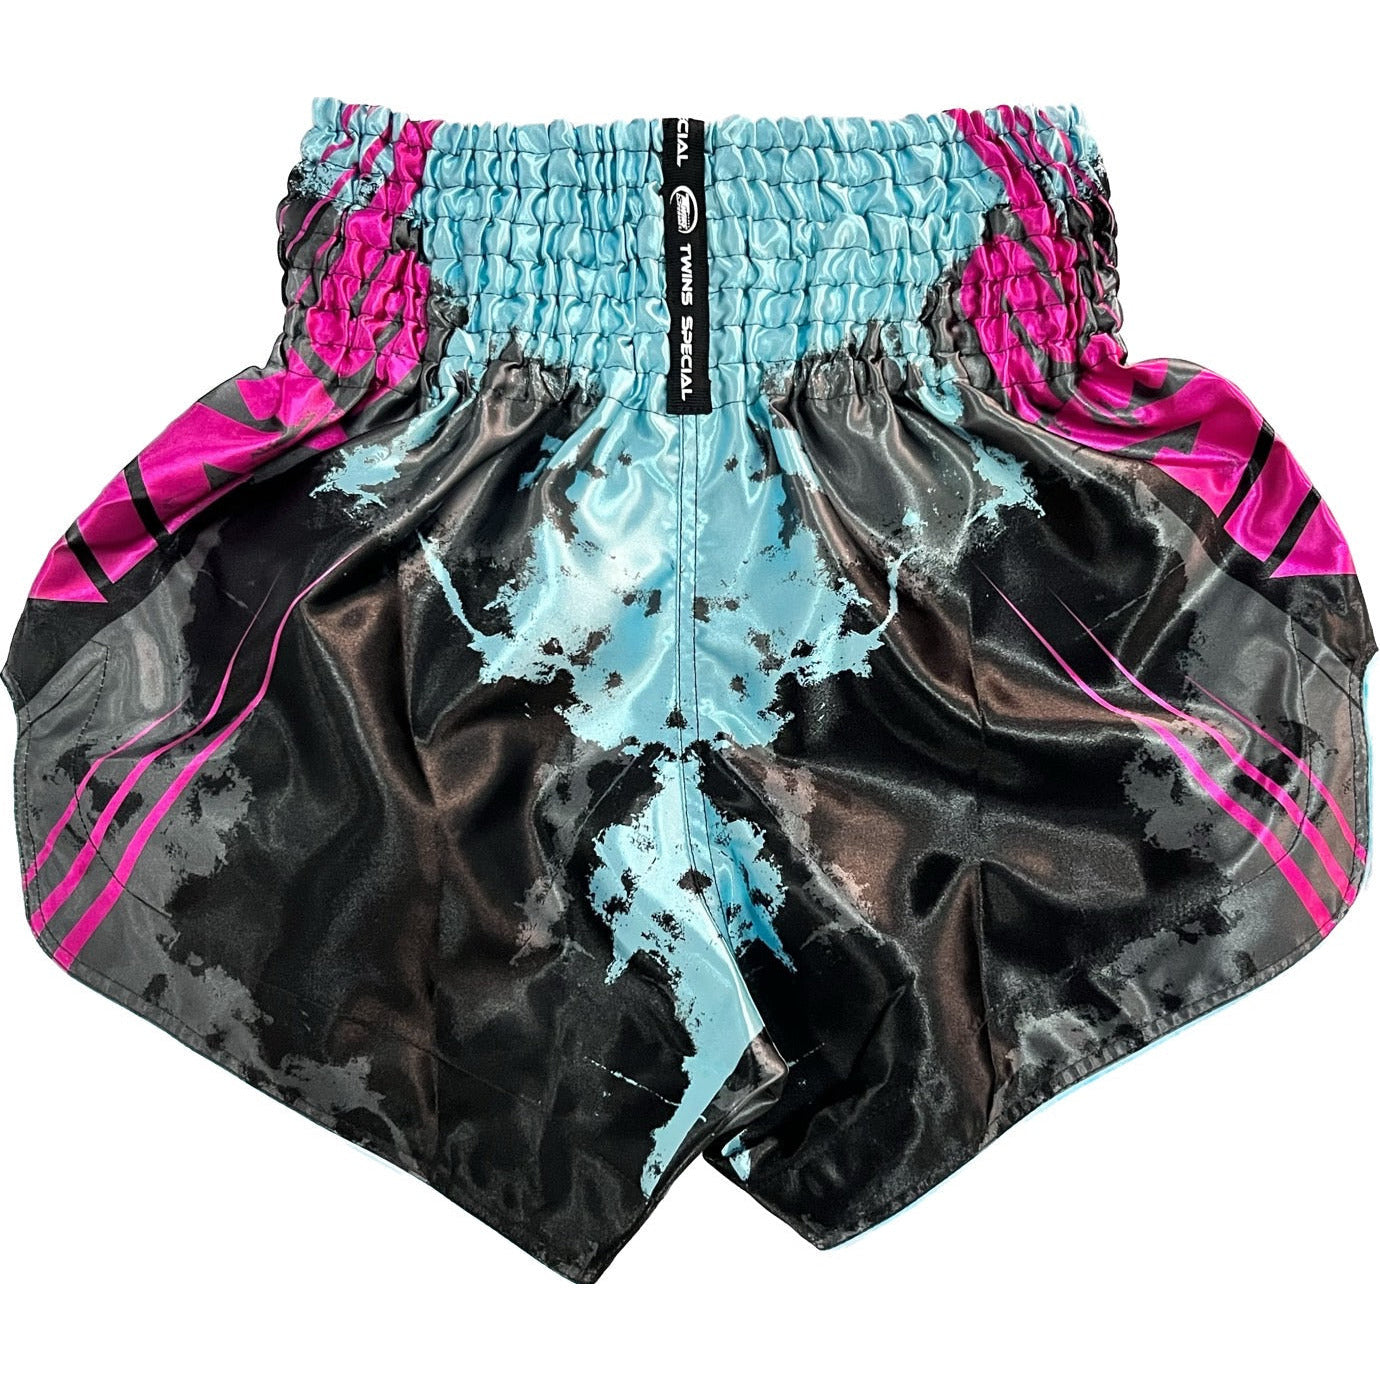 Twins Special Muay Thai Shorts TBS Candy